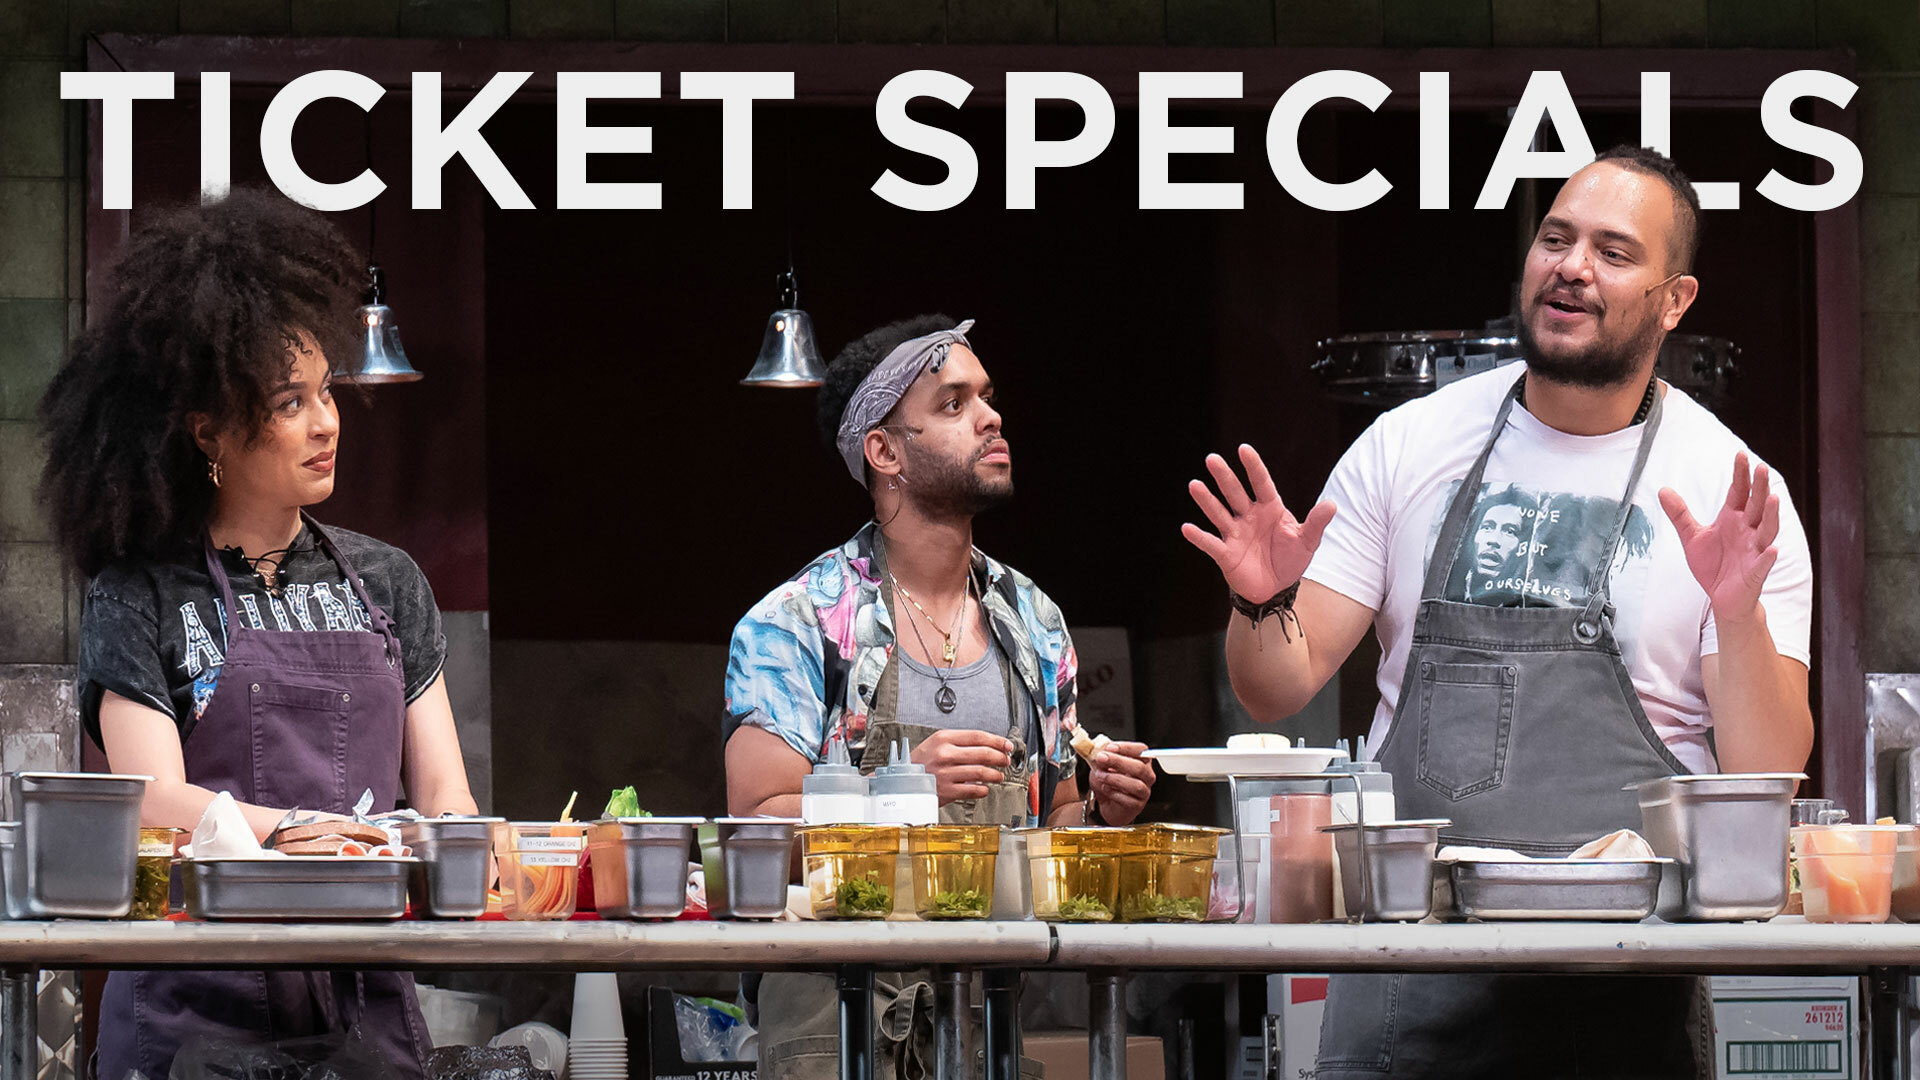 Three line cooks stand in a kitchen, one speaking and gesturing as the others look on. The words "Ticket Specials" appear above them.